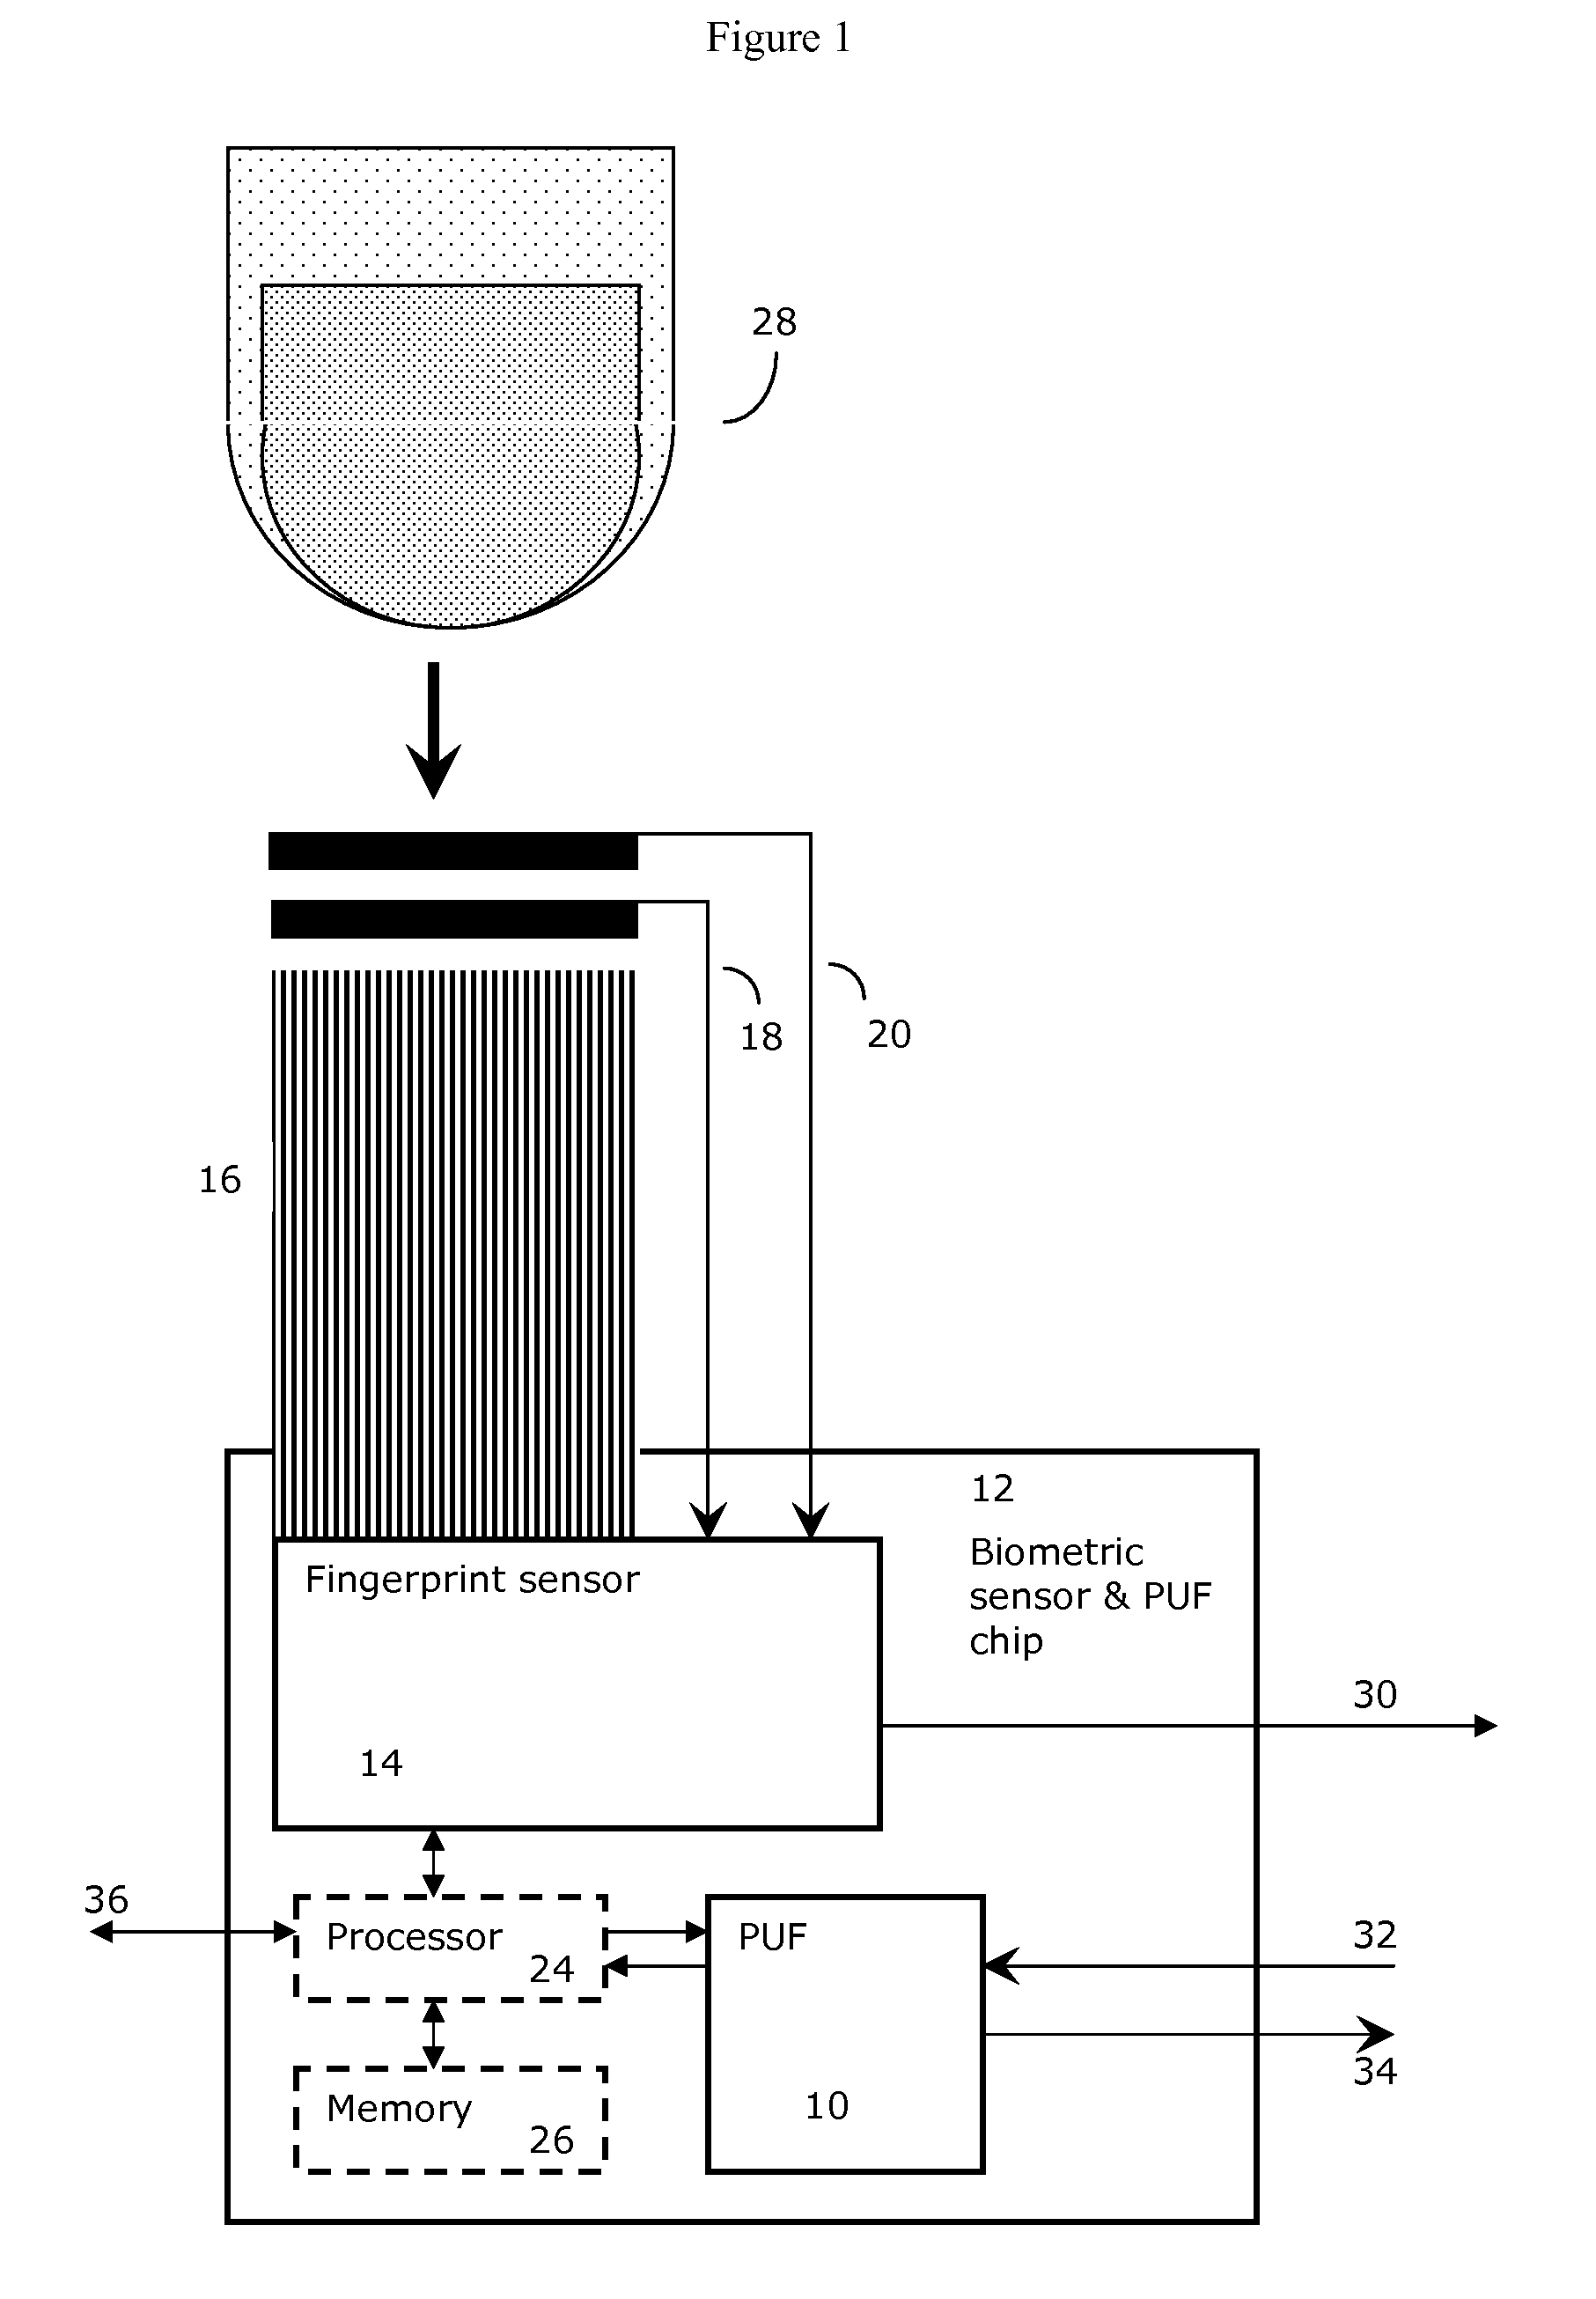 Method and System for Electronically Securing an Electronic Biometric Device Using Physically Unclonable Functions